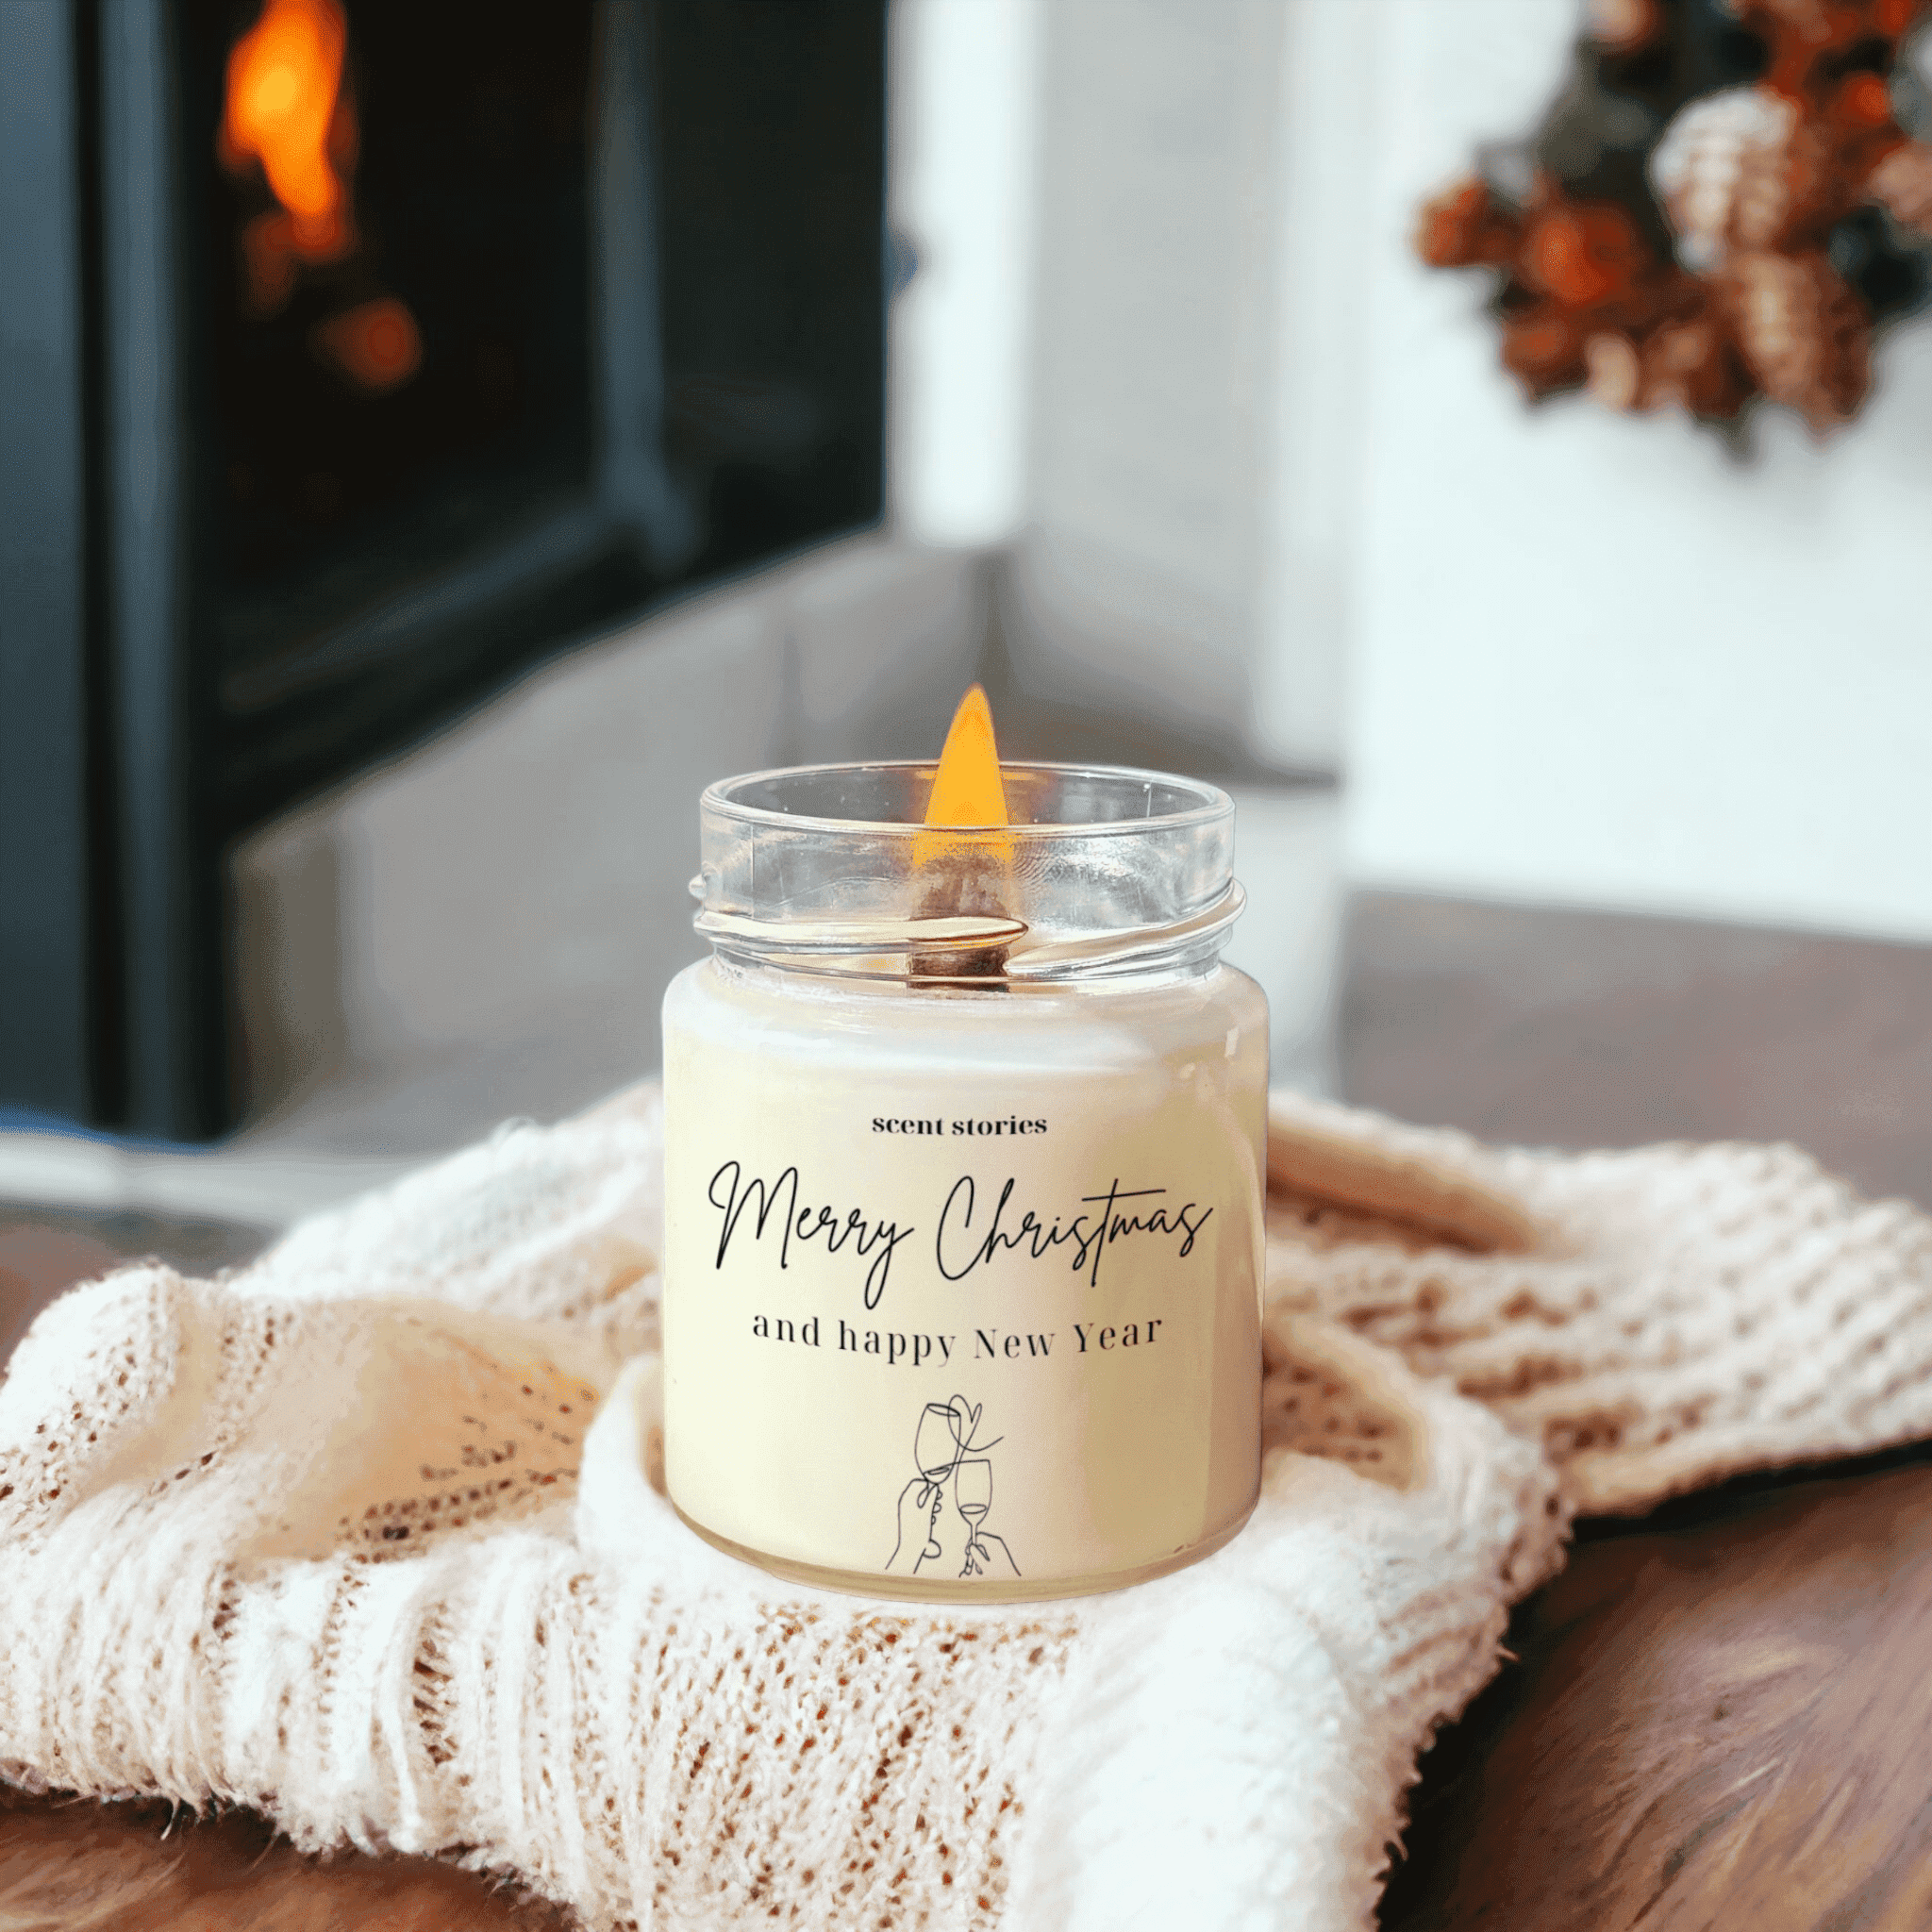 Christmas Wishes - Festive Scent - Scent Stories